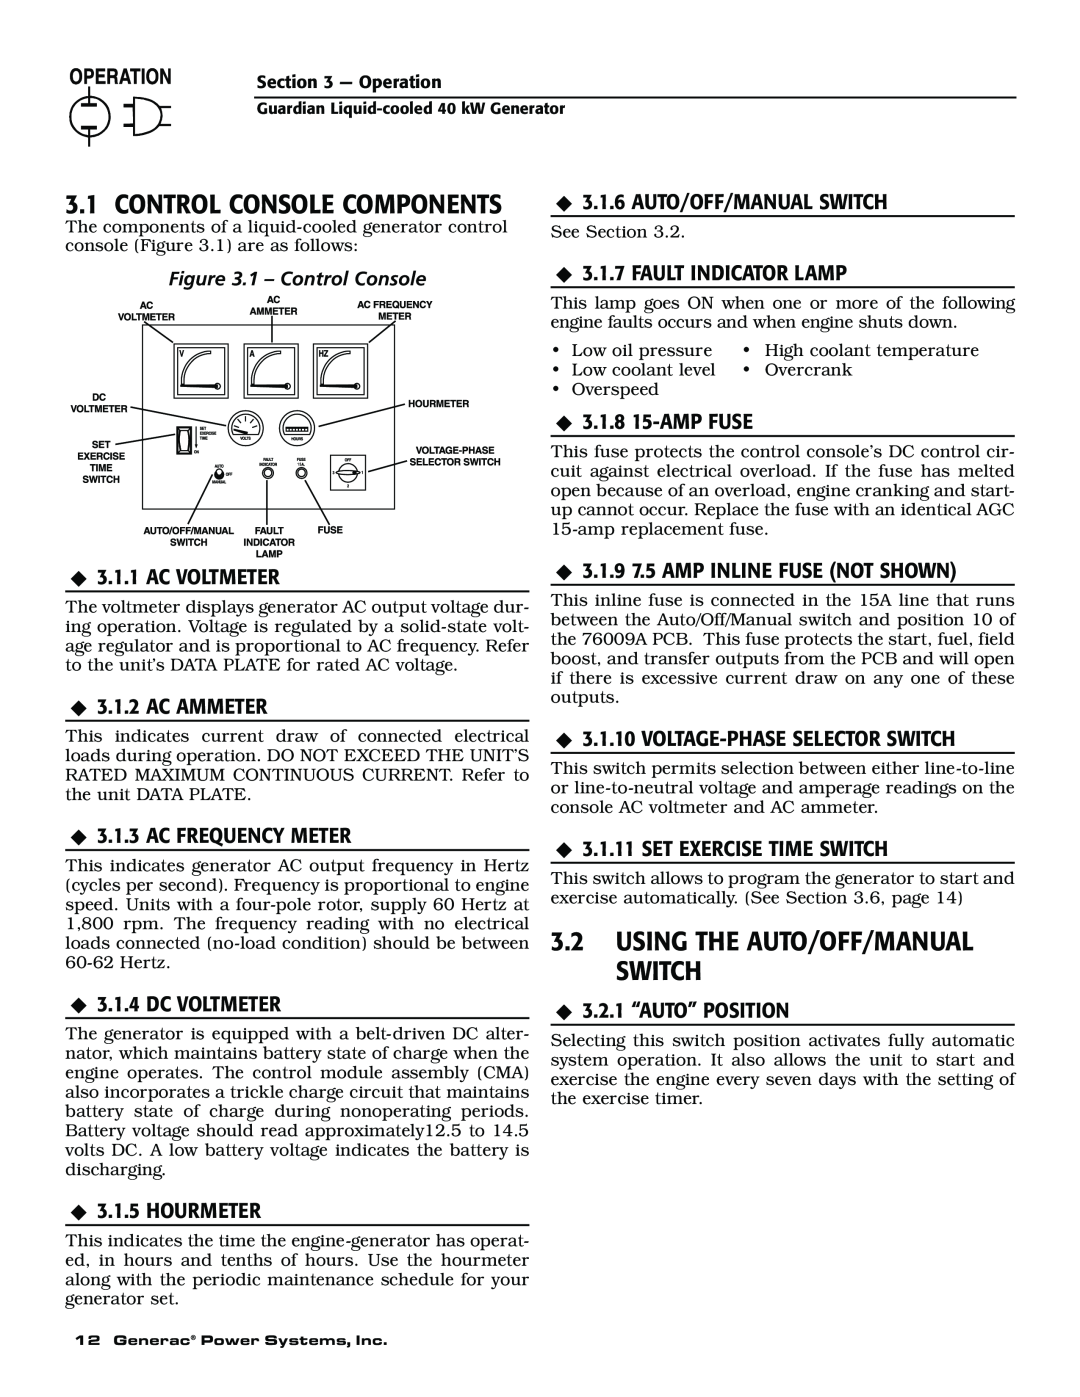 Generac 004373-2, 004626-1, 004626-1, 004373-2 owner manual Using The Auto/Off/Manual Switch, Control Console Components 